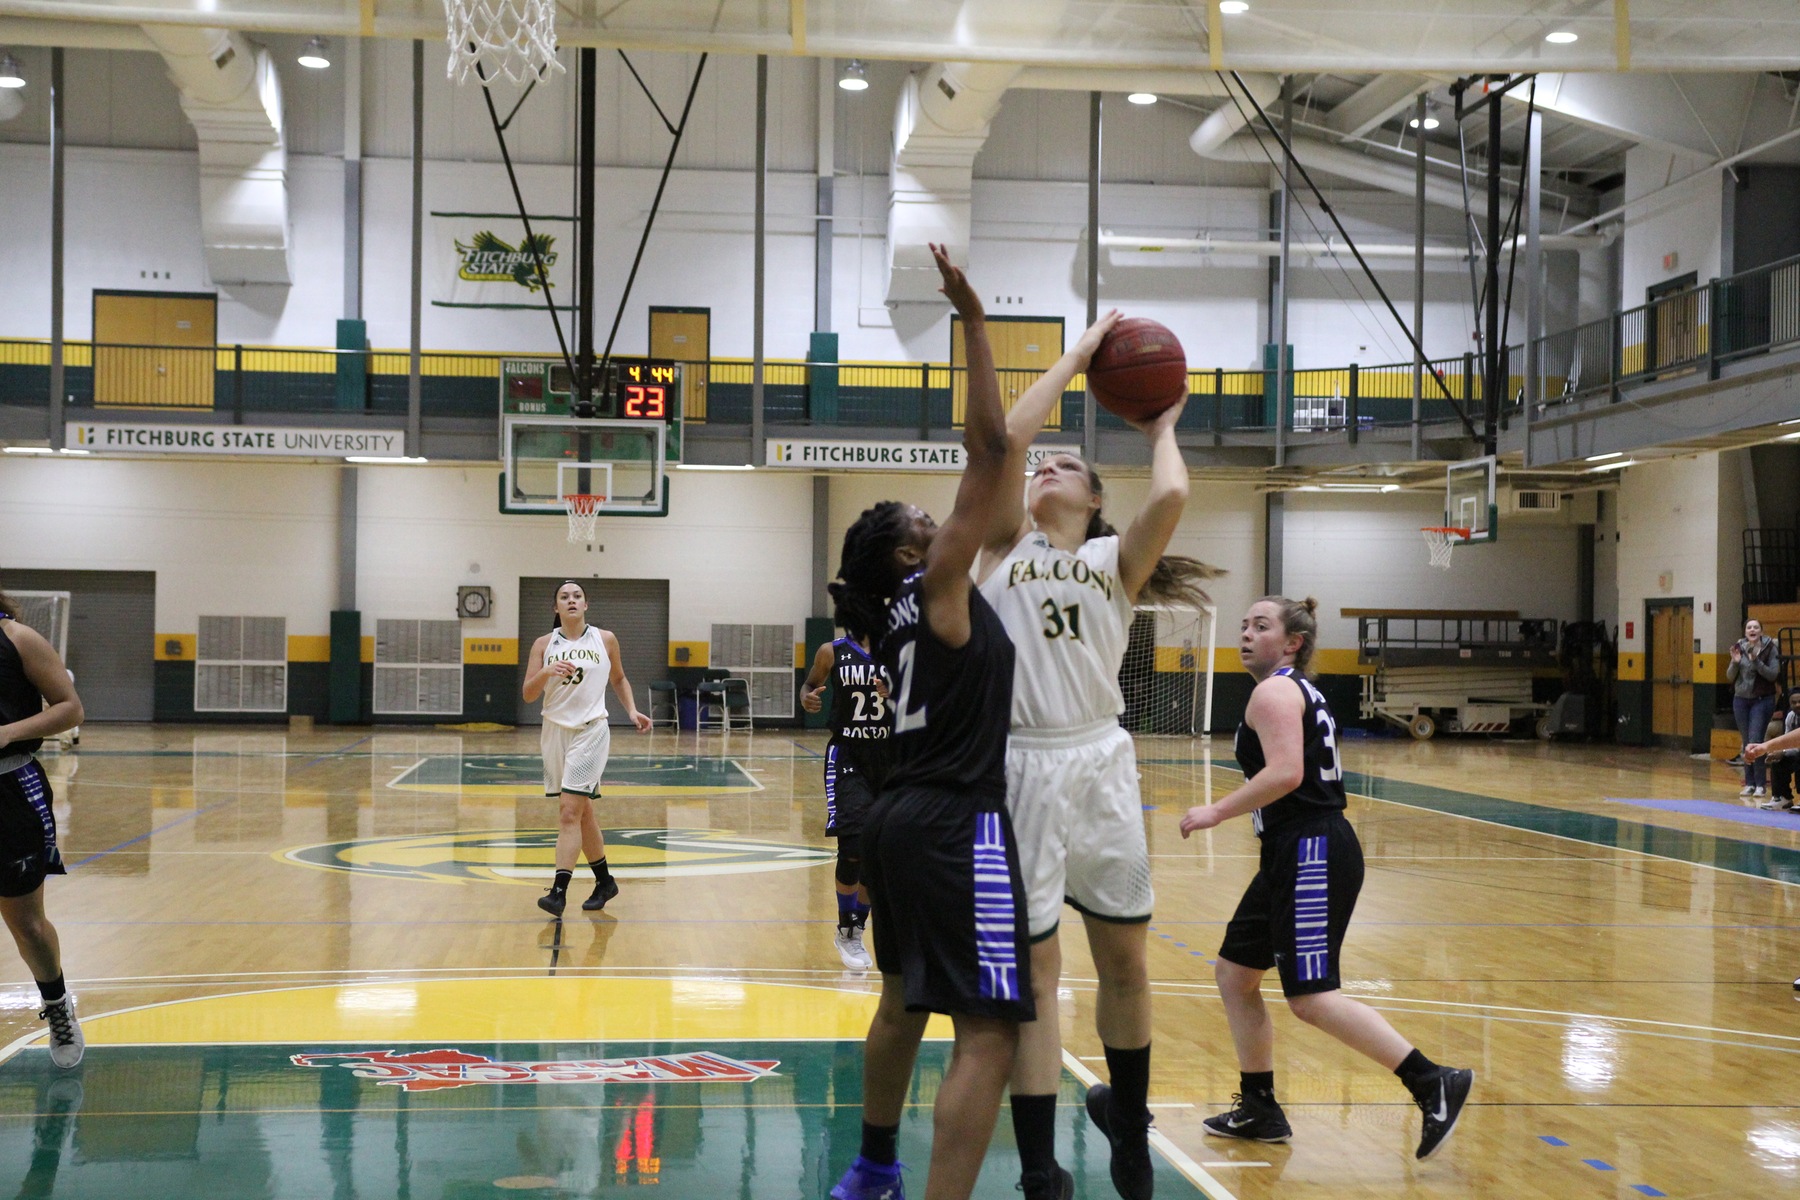 Fitchburg State Upended By MCLA, 62-38